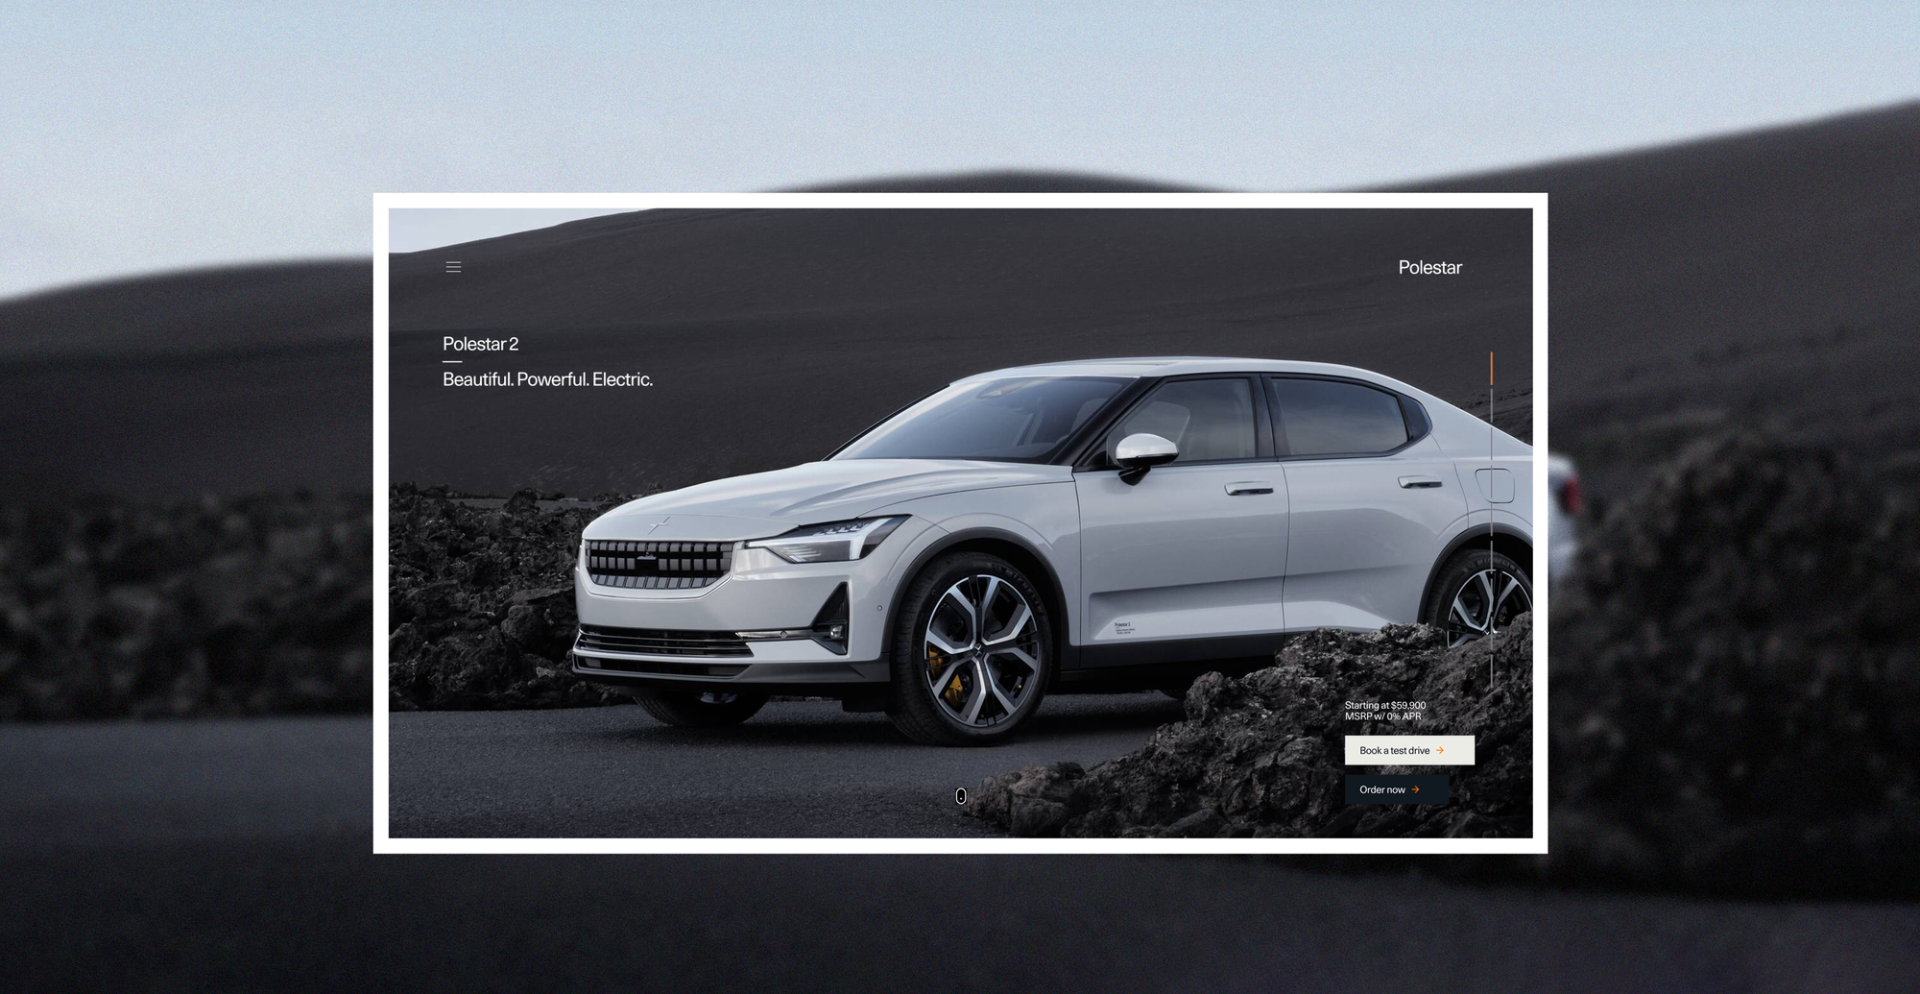 YML Builds Digital Experience That Helps Polestar IPO